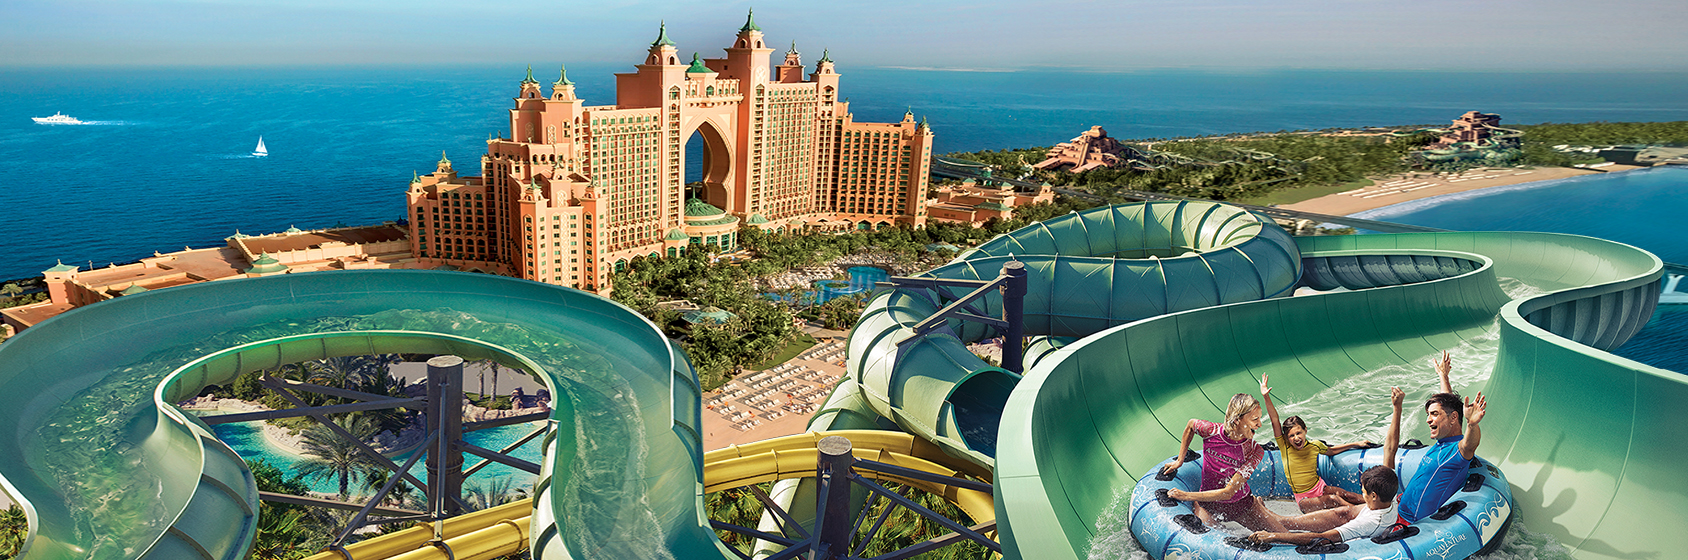 Spring Into Aquaventure With An Annual Pass